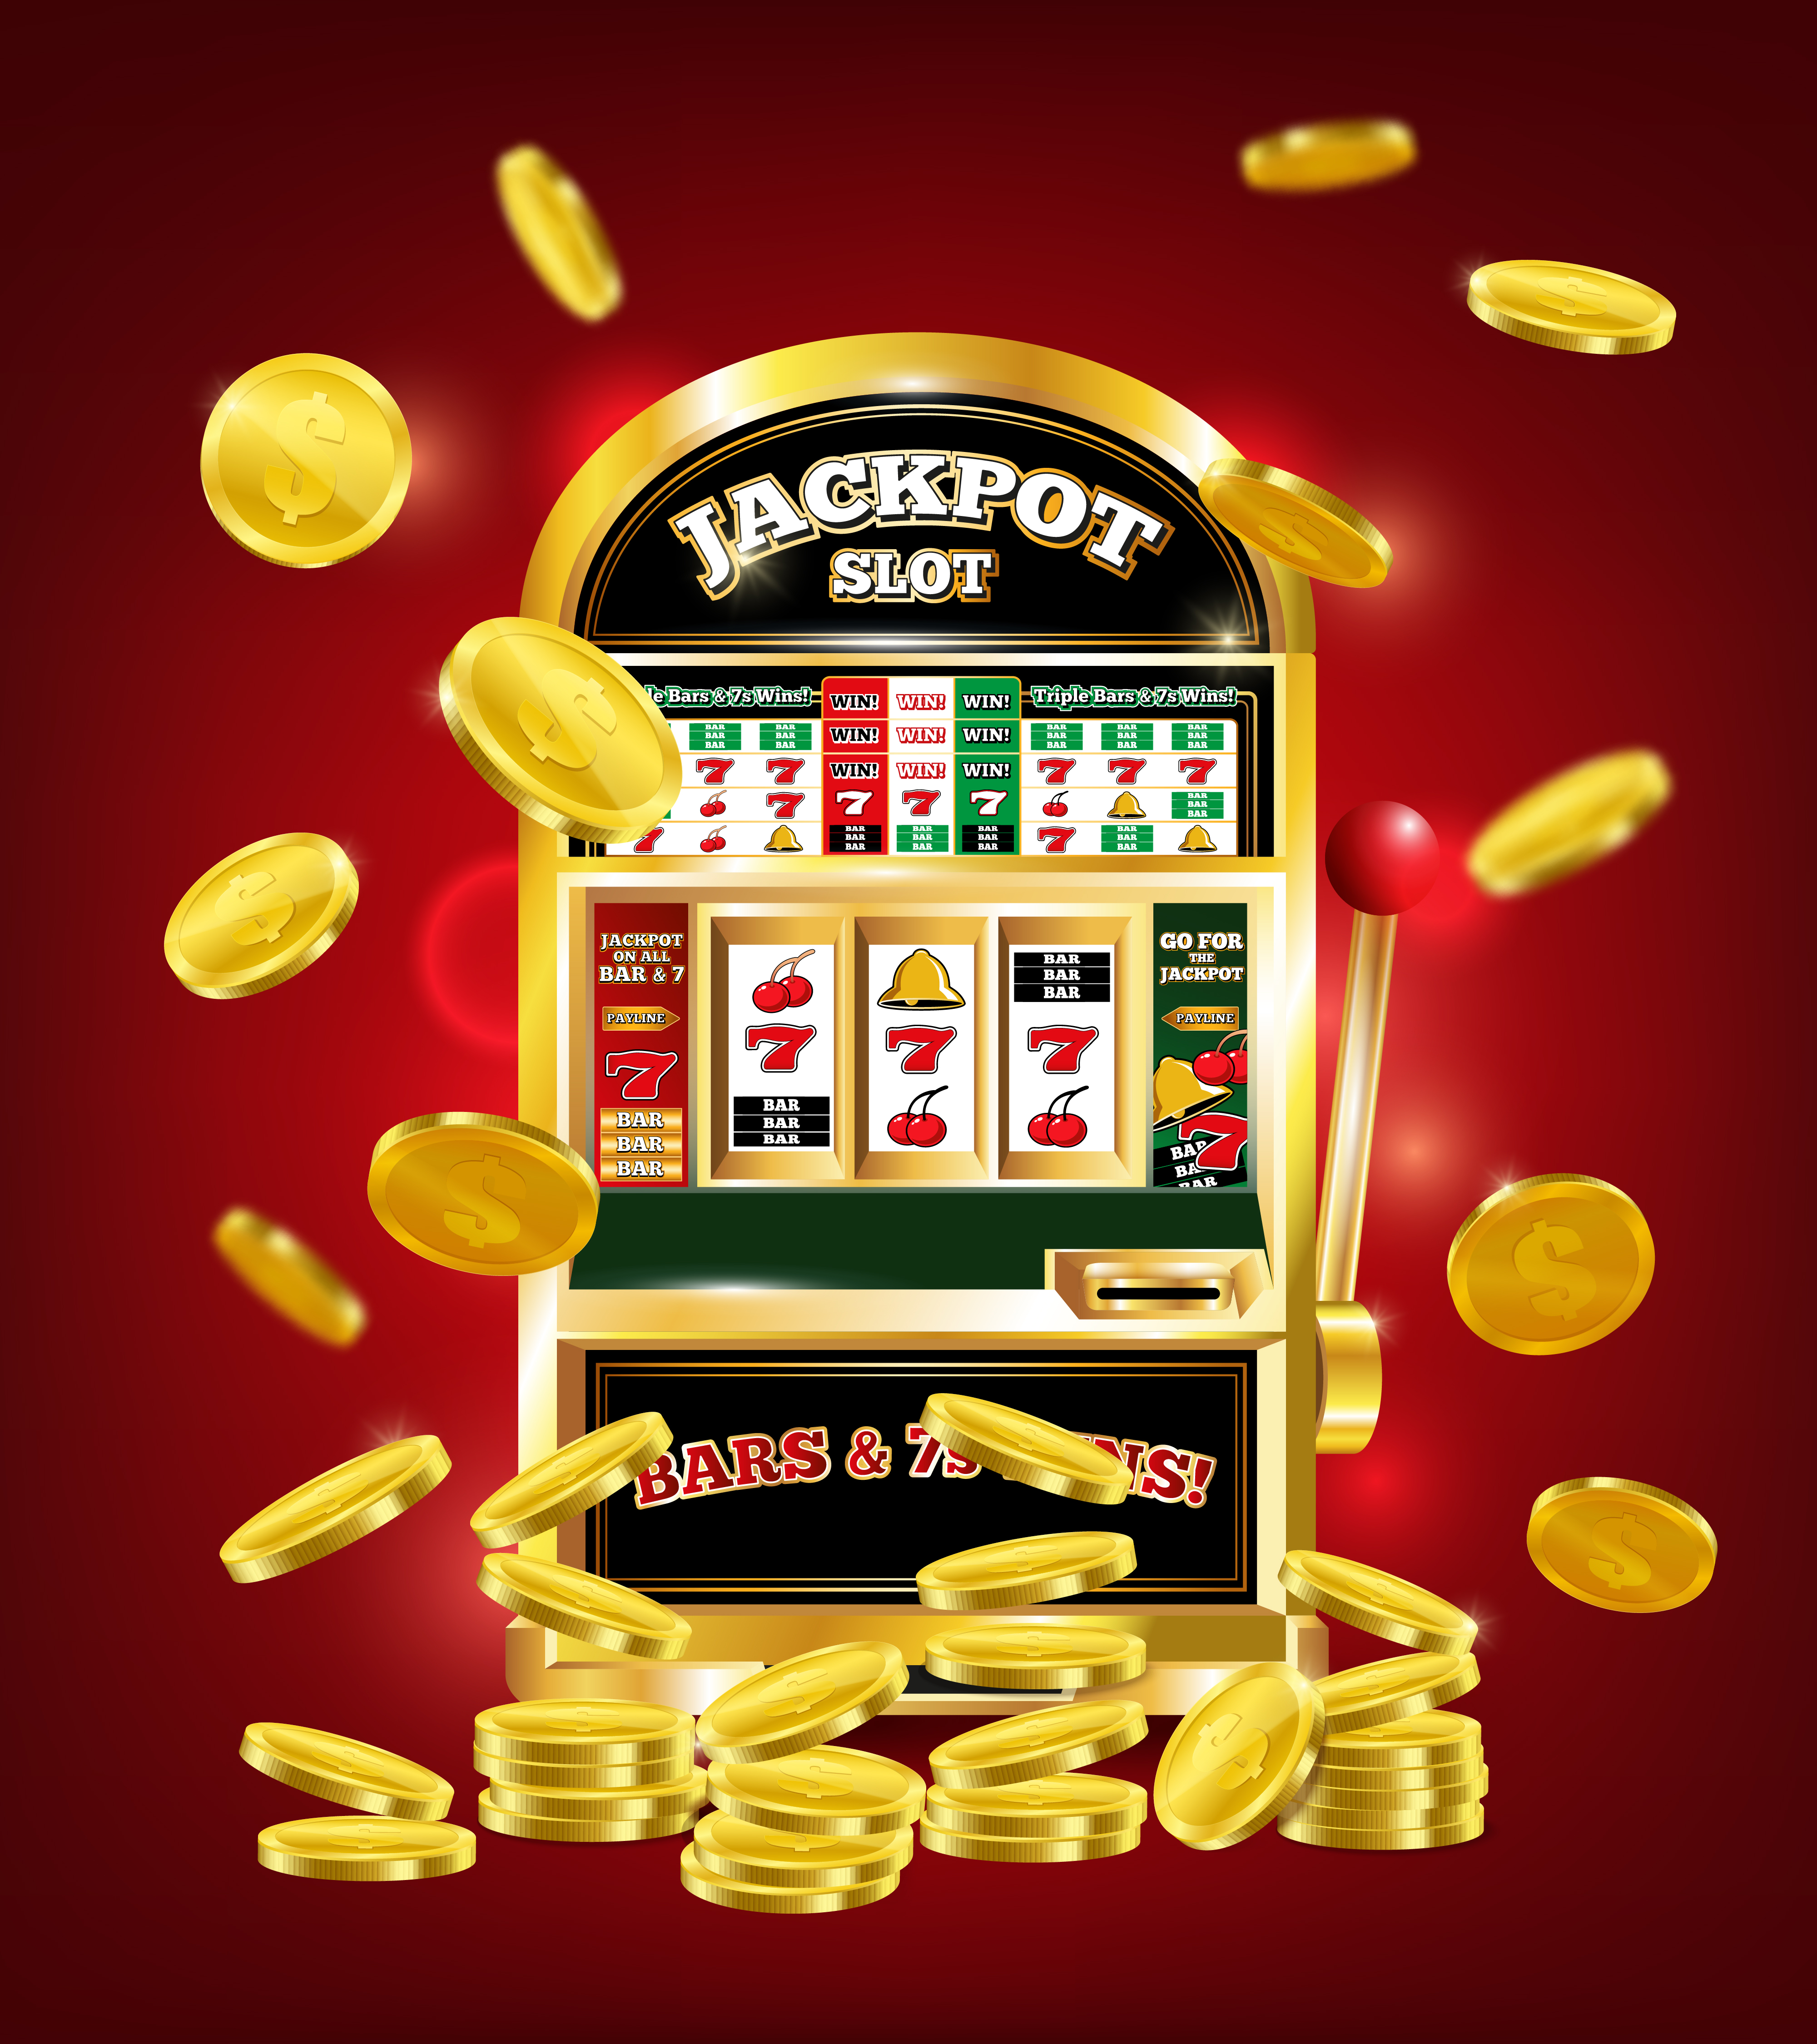 Jackpot Master Free Coins - How To Win Millions Of Coins?